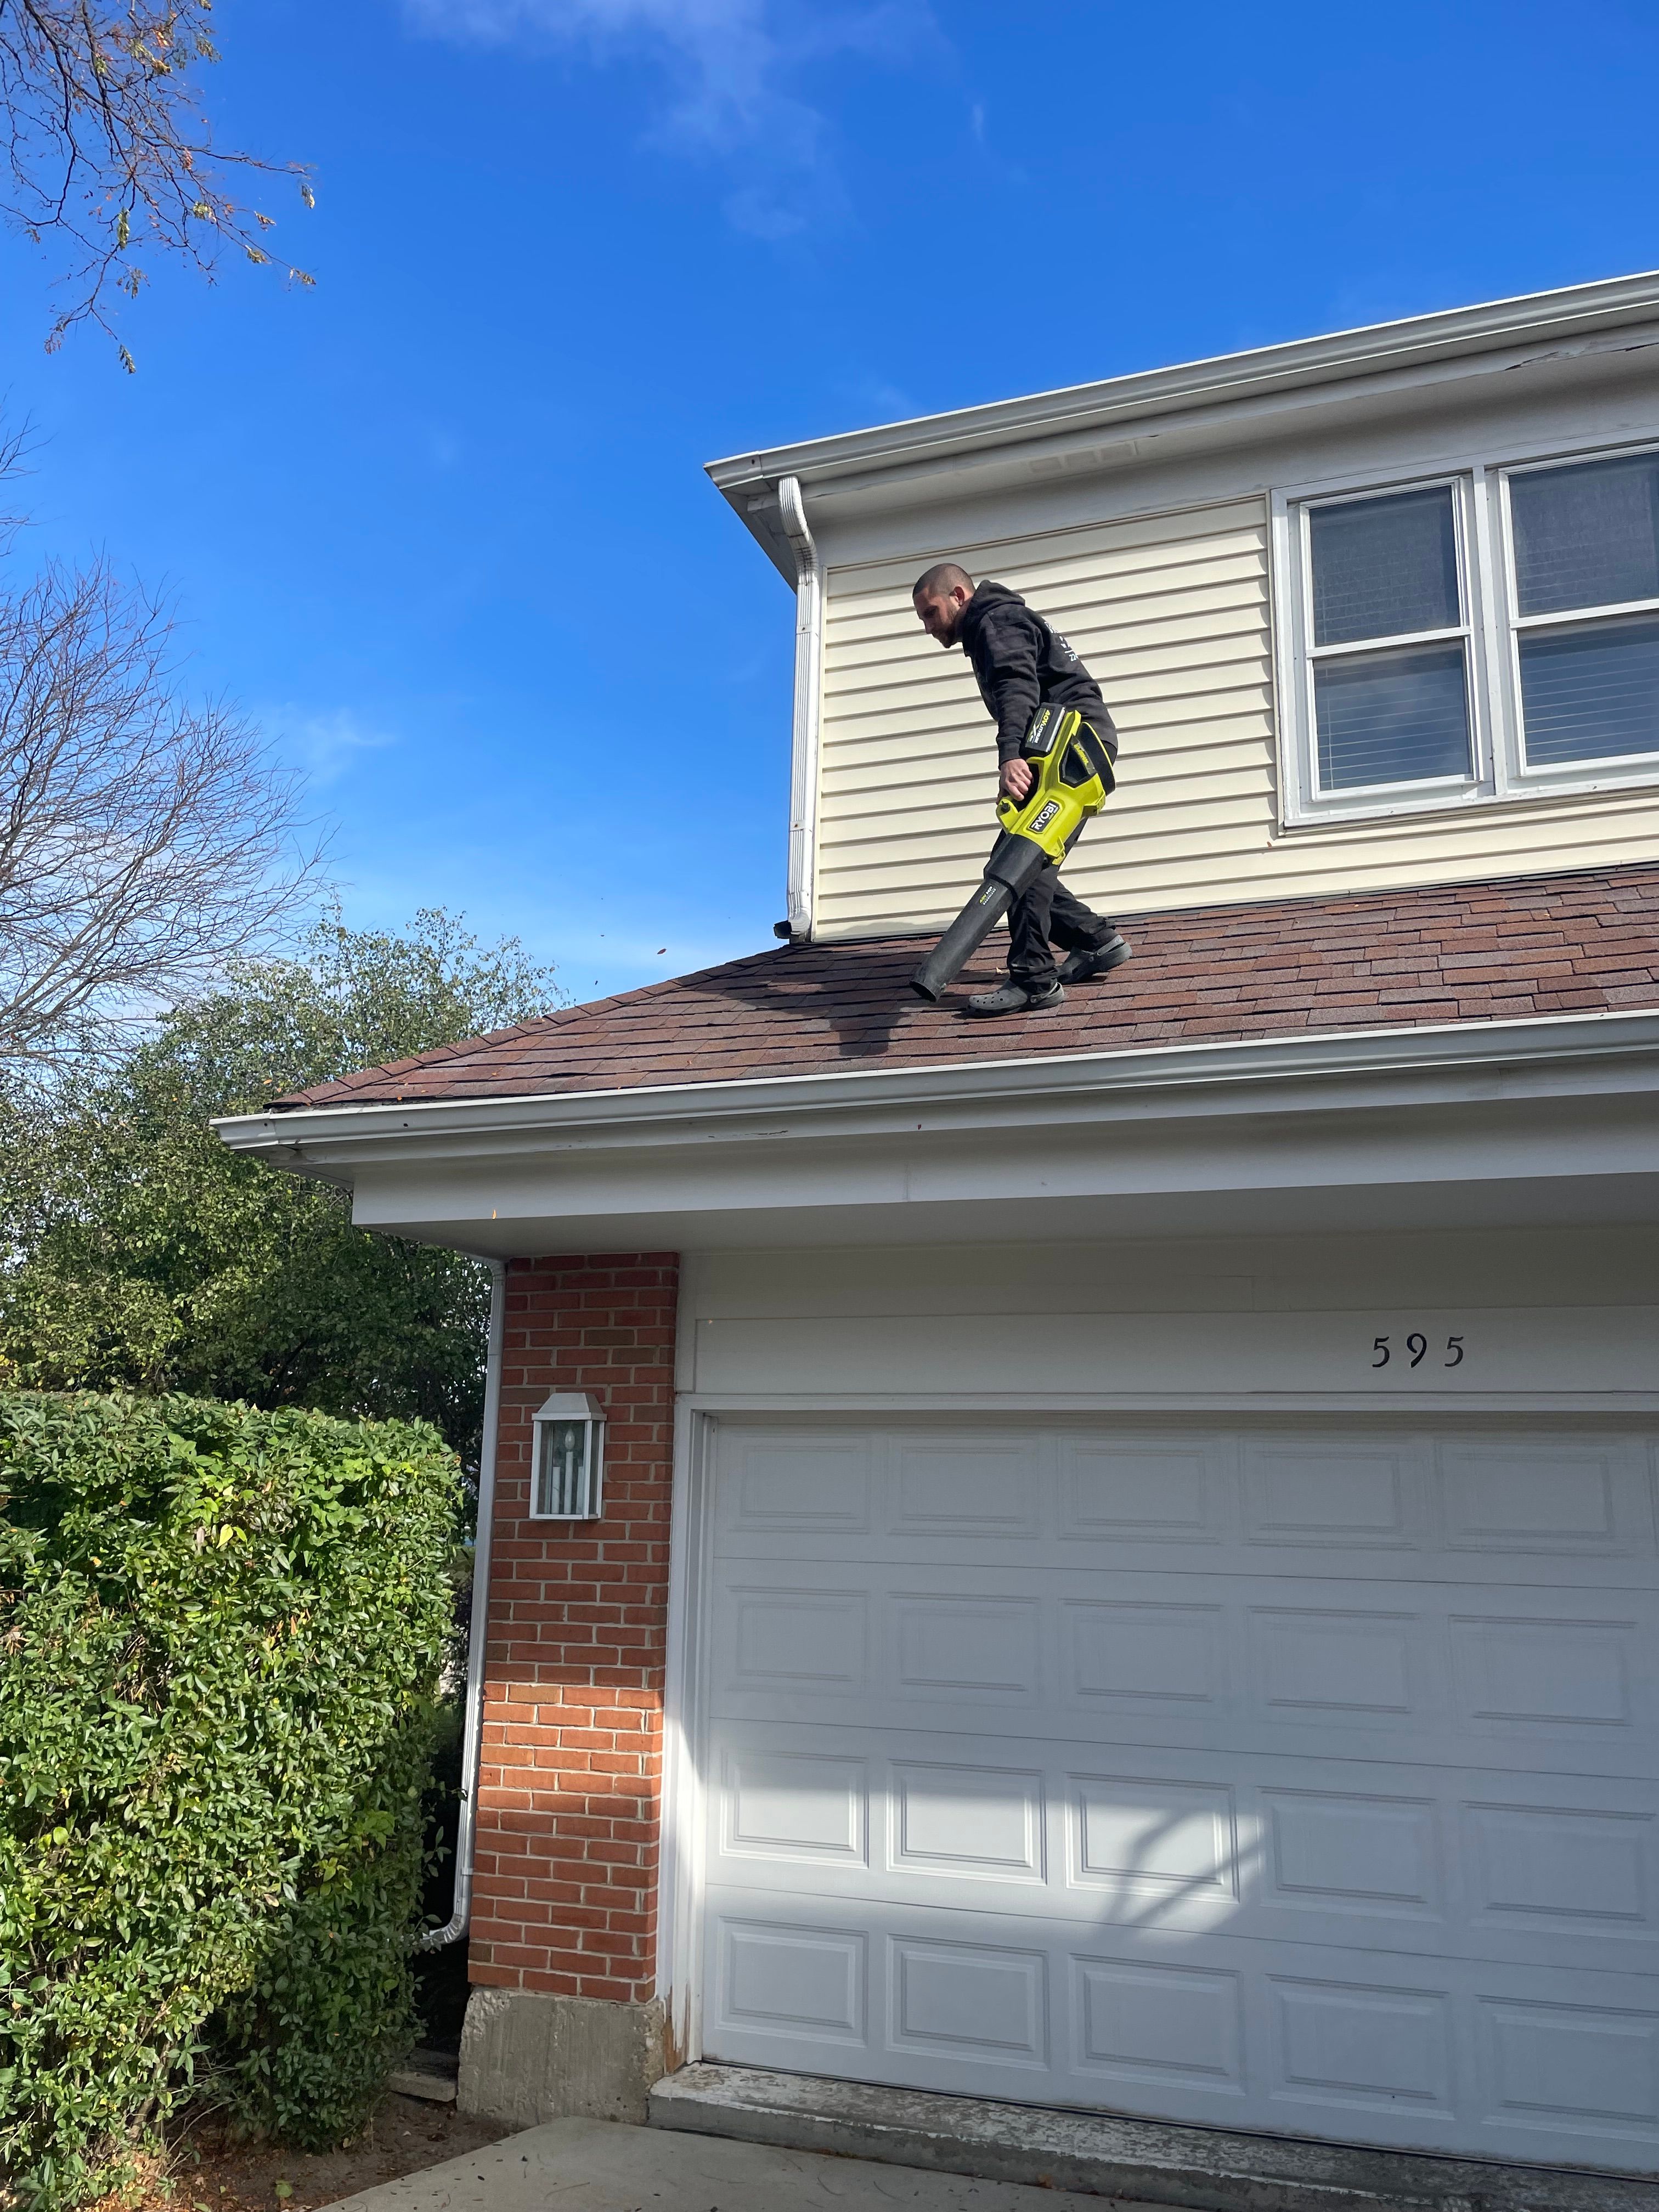 Gutter Cleaning for Premier Partners, LLC. in Volo, IL